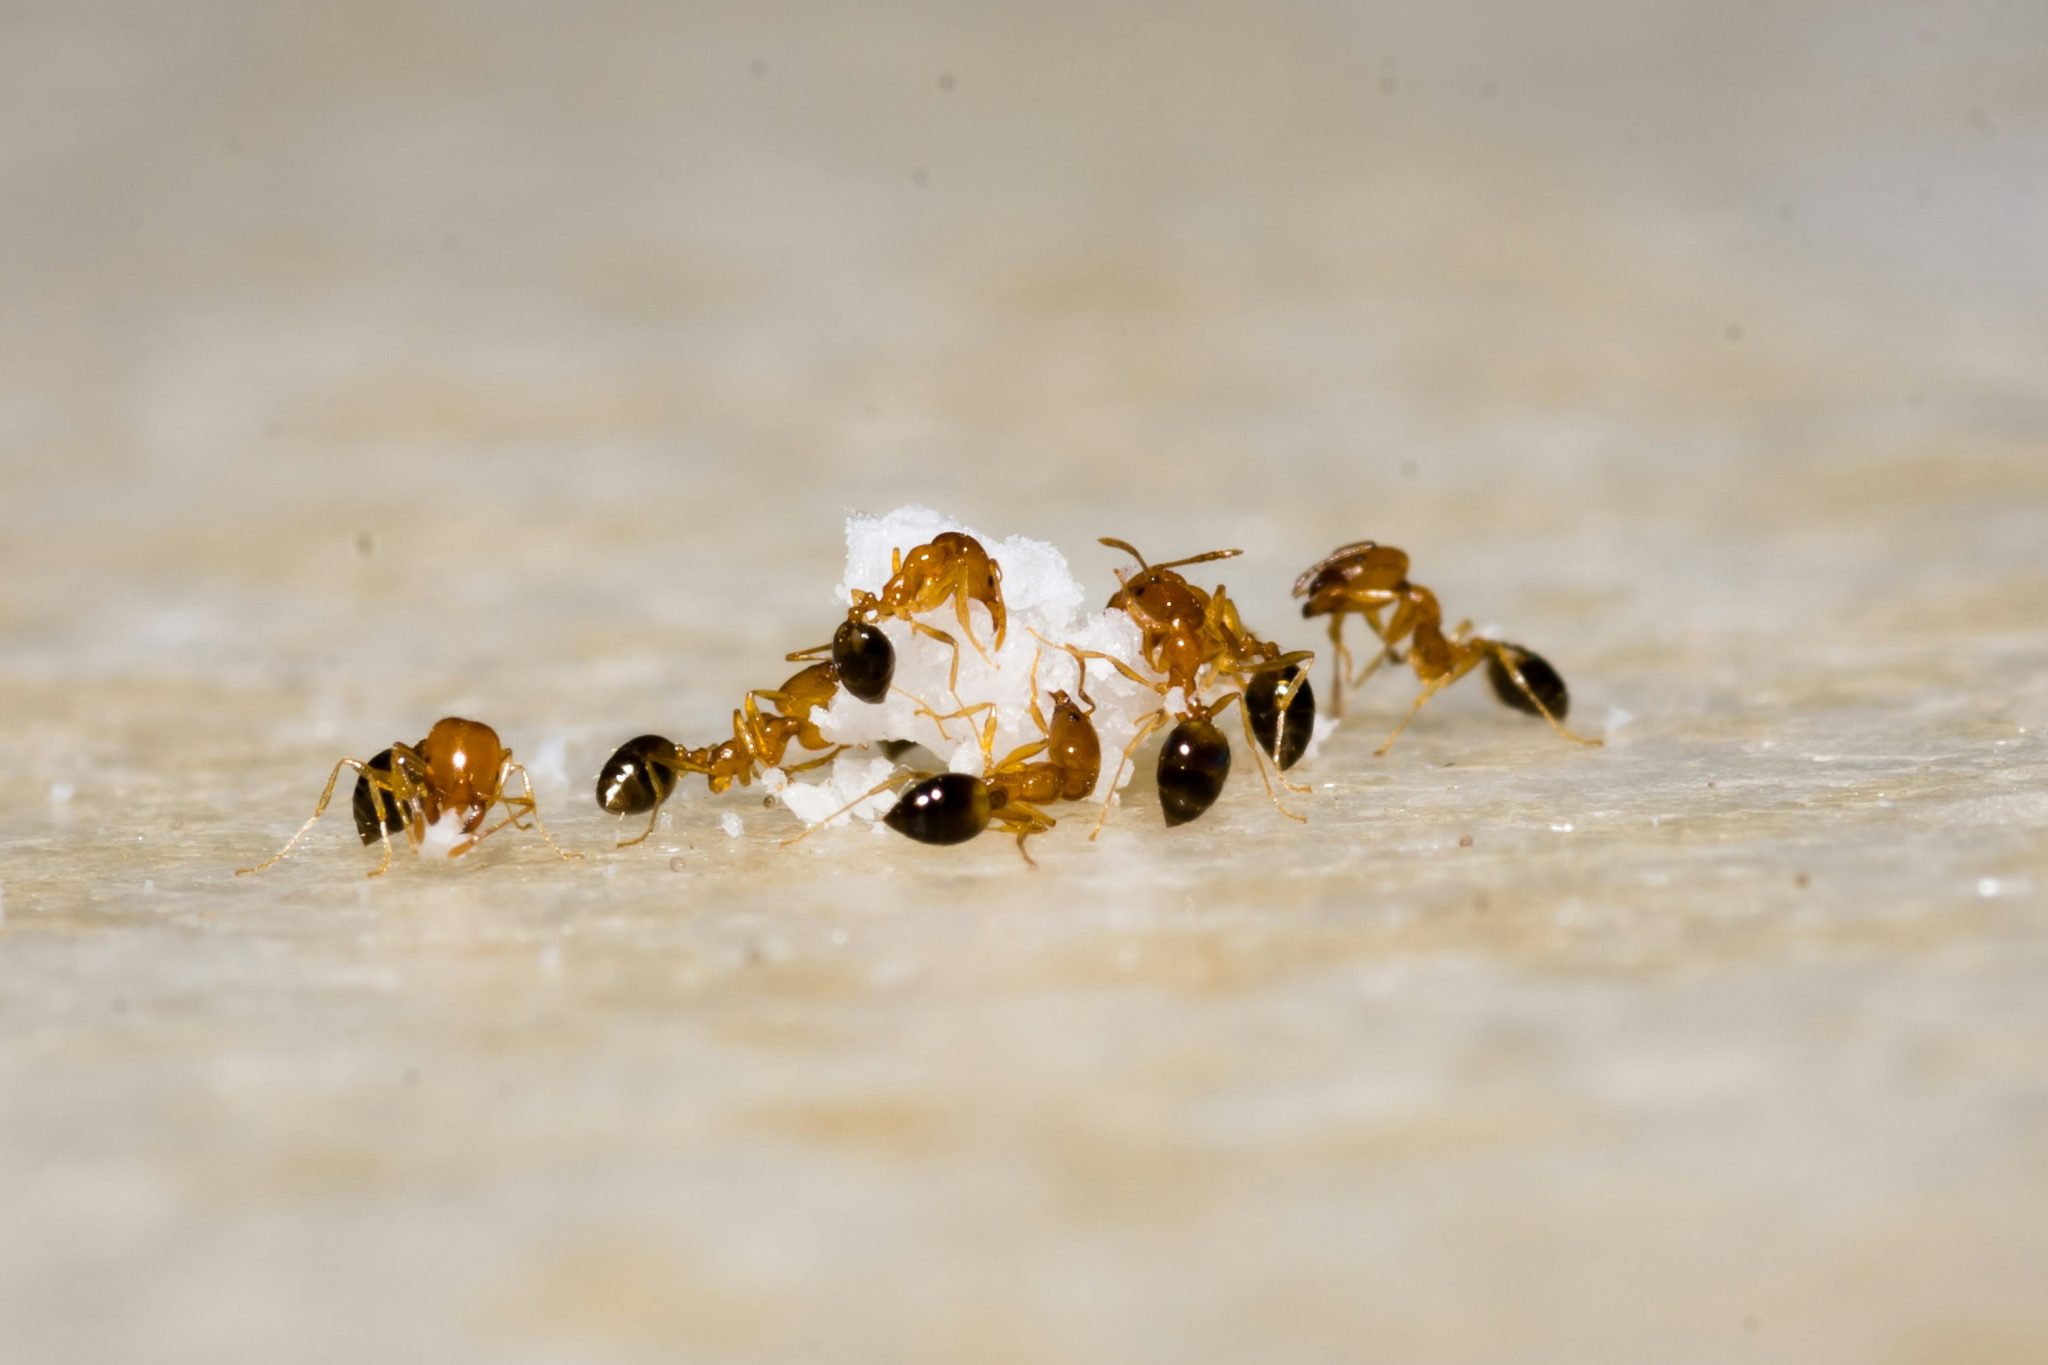 Seven red ants working on a white, crystalline substance and climbing on it.